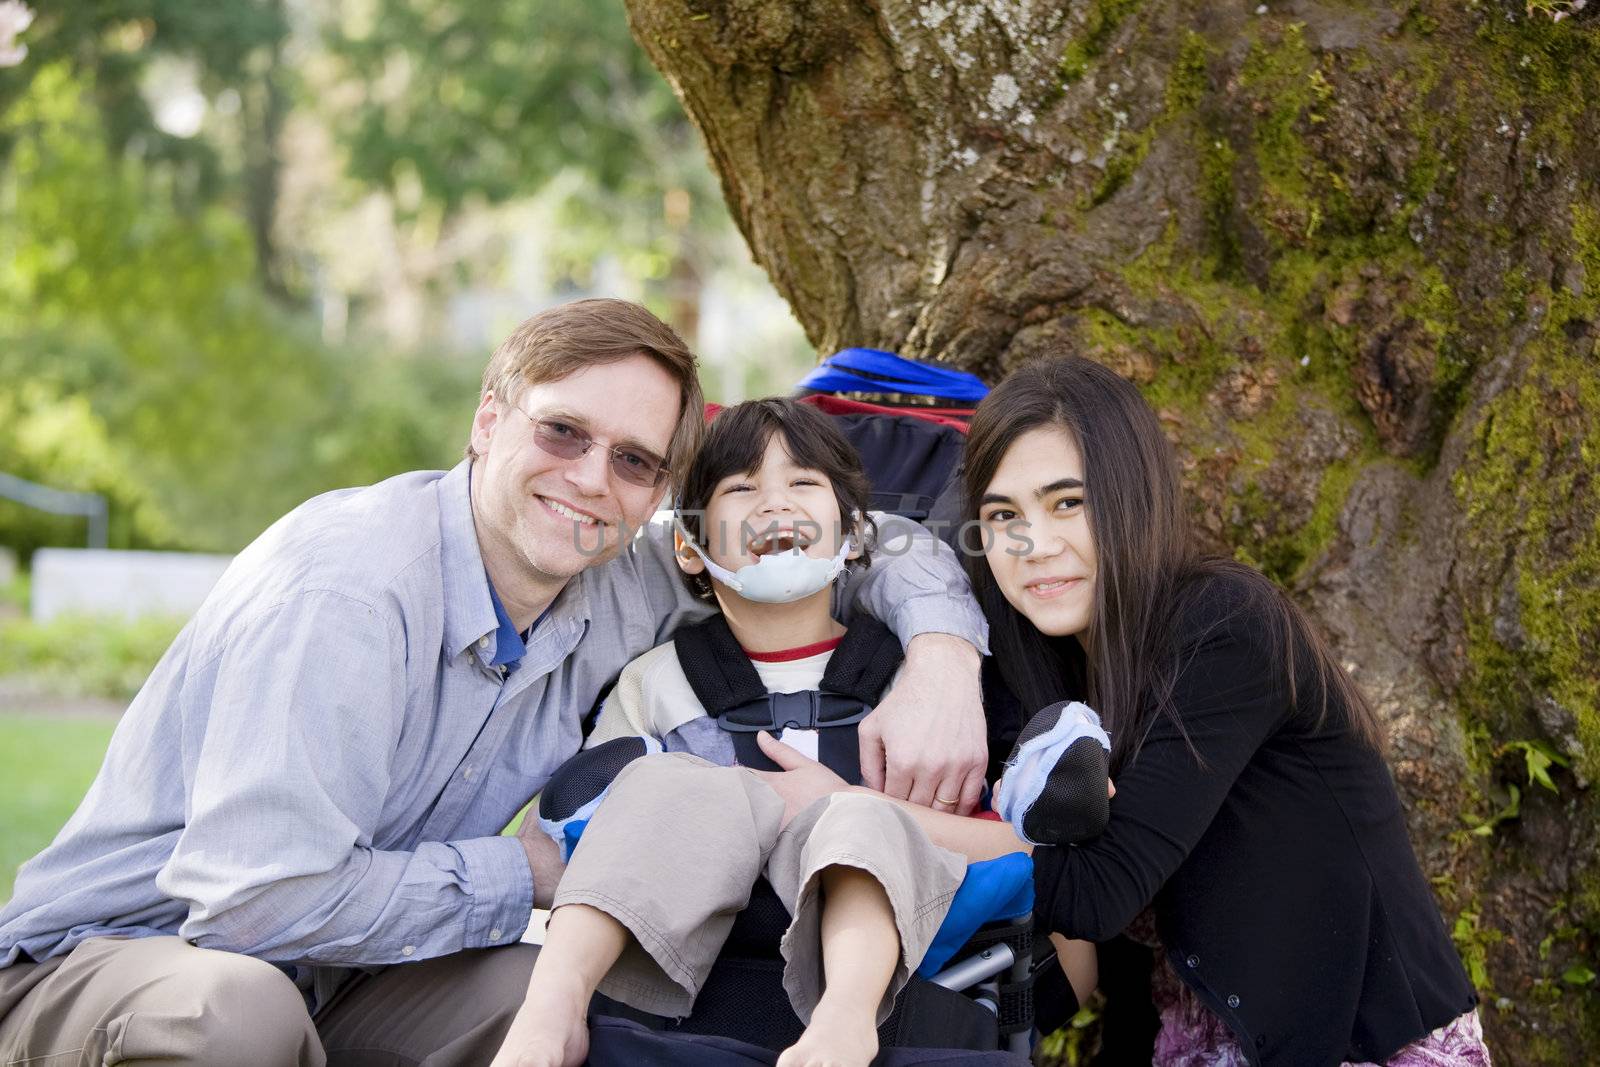 Happy disabled boy with cerebral palsy  in wheelchair surrounded by father and older sister, laughing